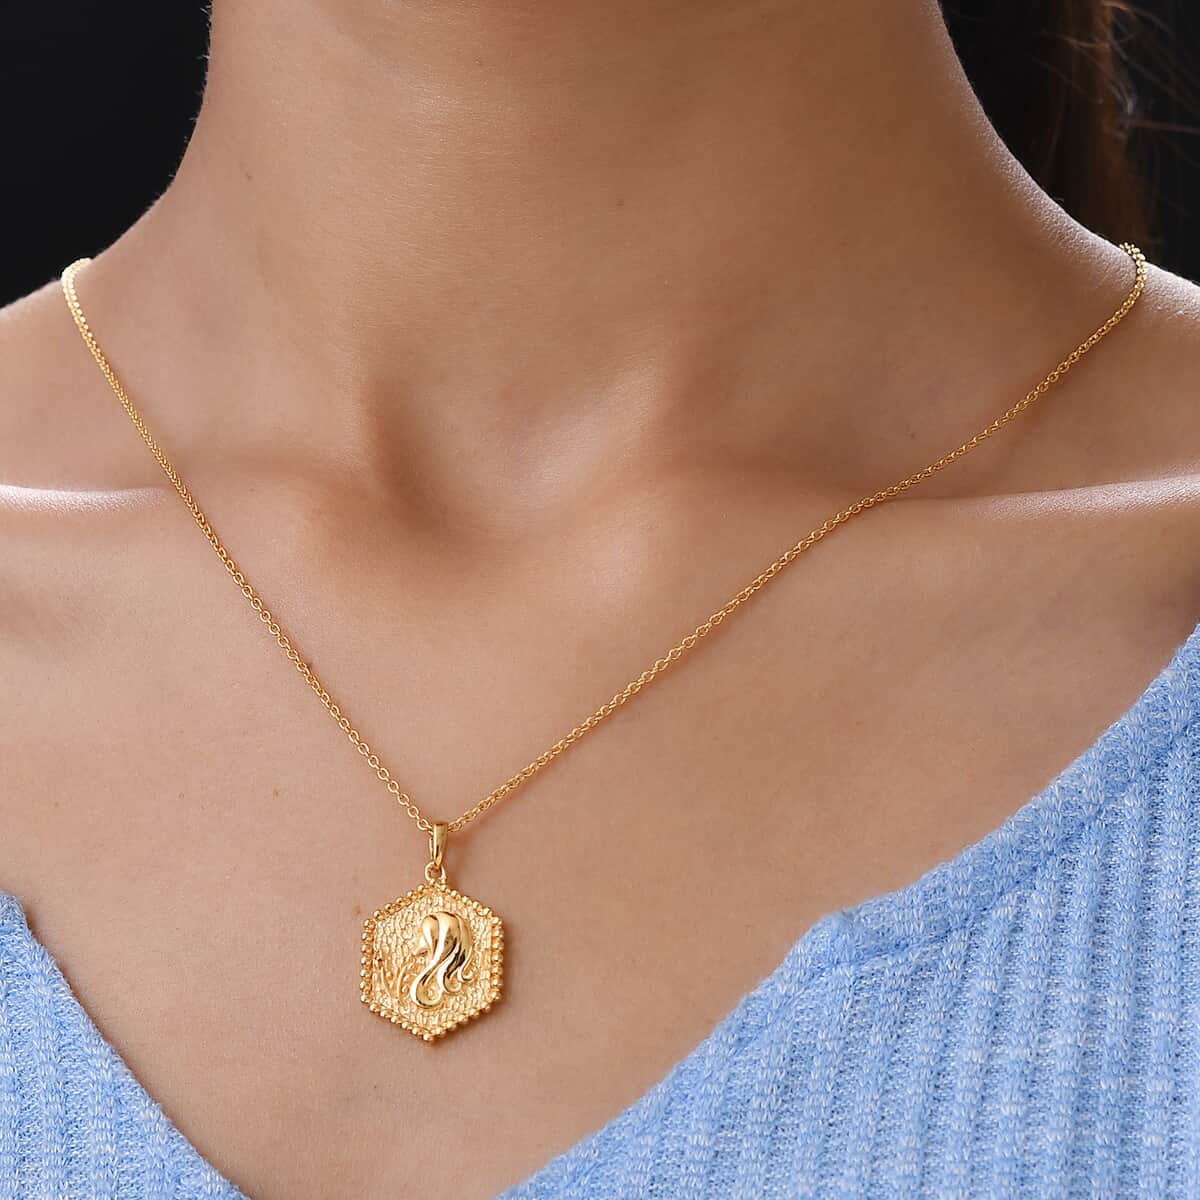 KARIS Virgo Zodiac Pendant Necklace 20 Inches in 18K YG Plated and ION Plated Yellow Gold Stainless Steel image number 2